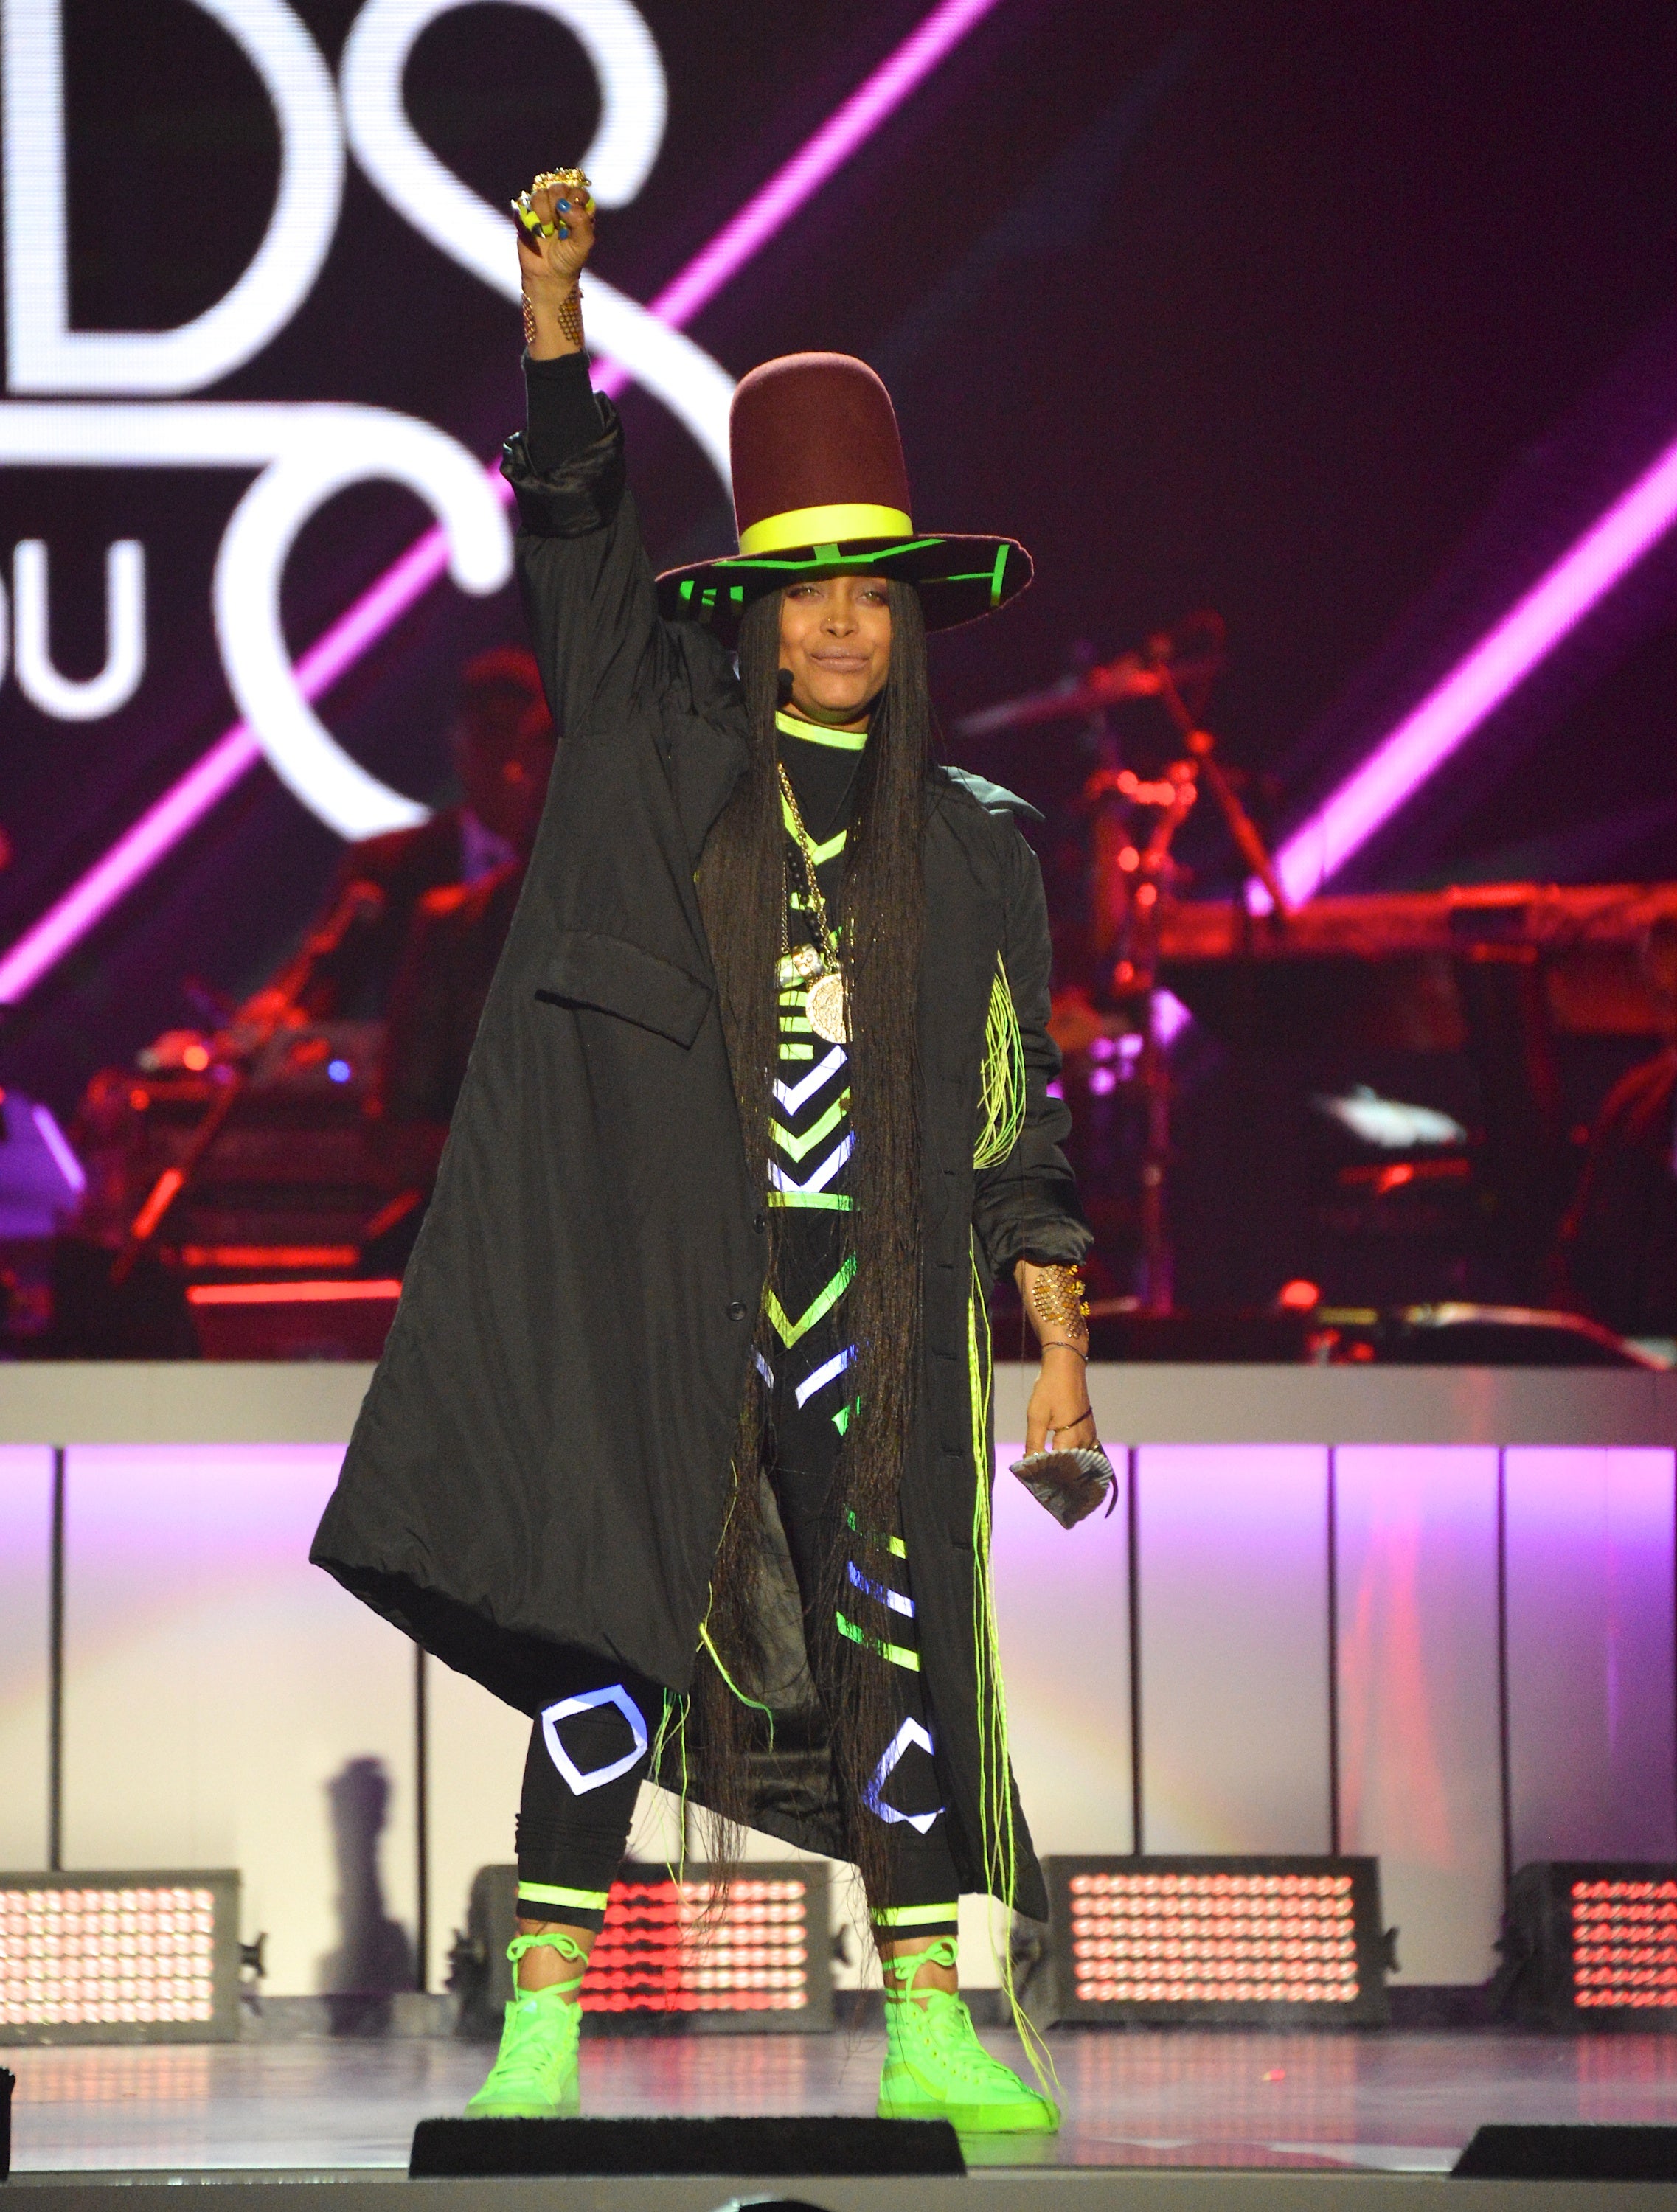 Every Single Outfit Erykah Badu Rocked At The 2016 Soul Train Music Awards